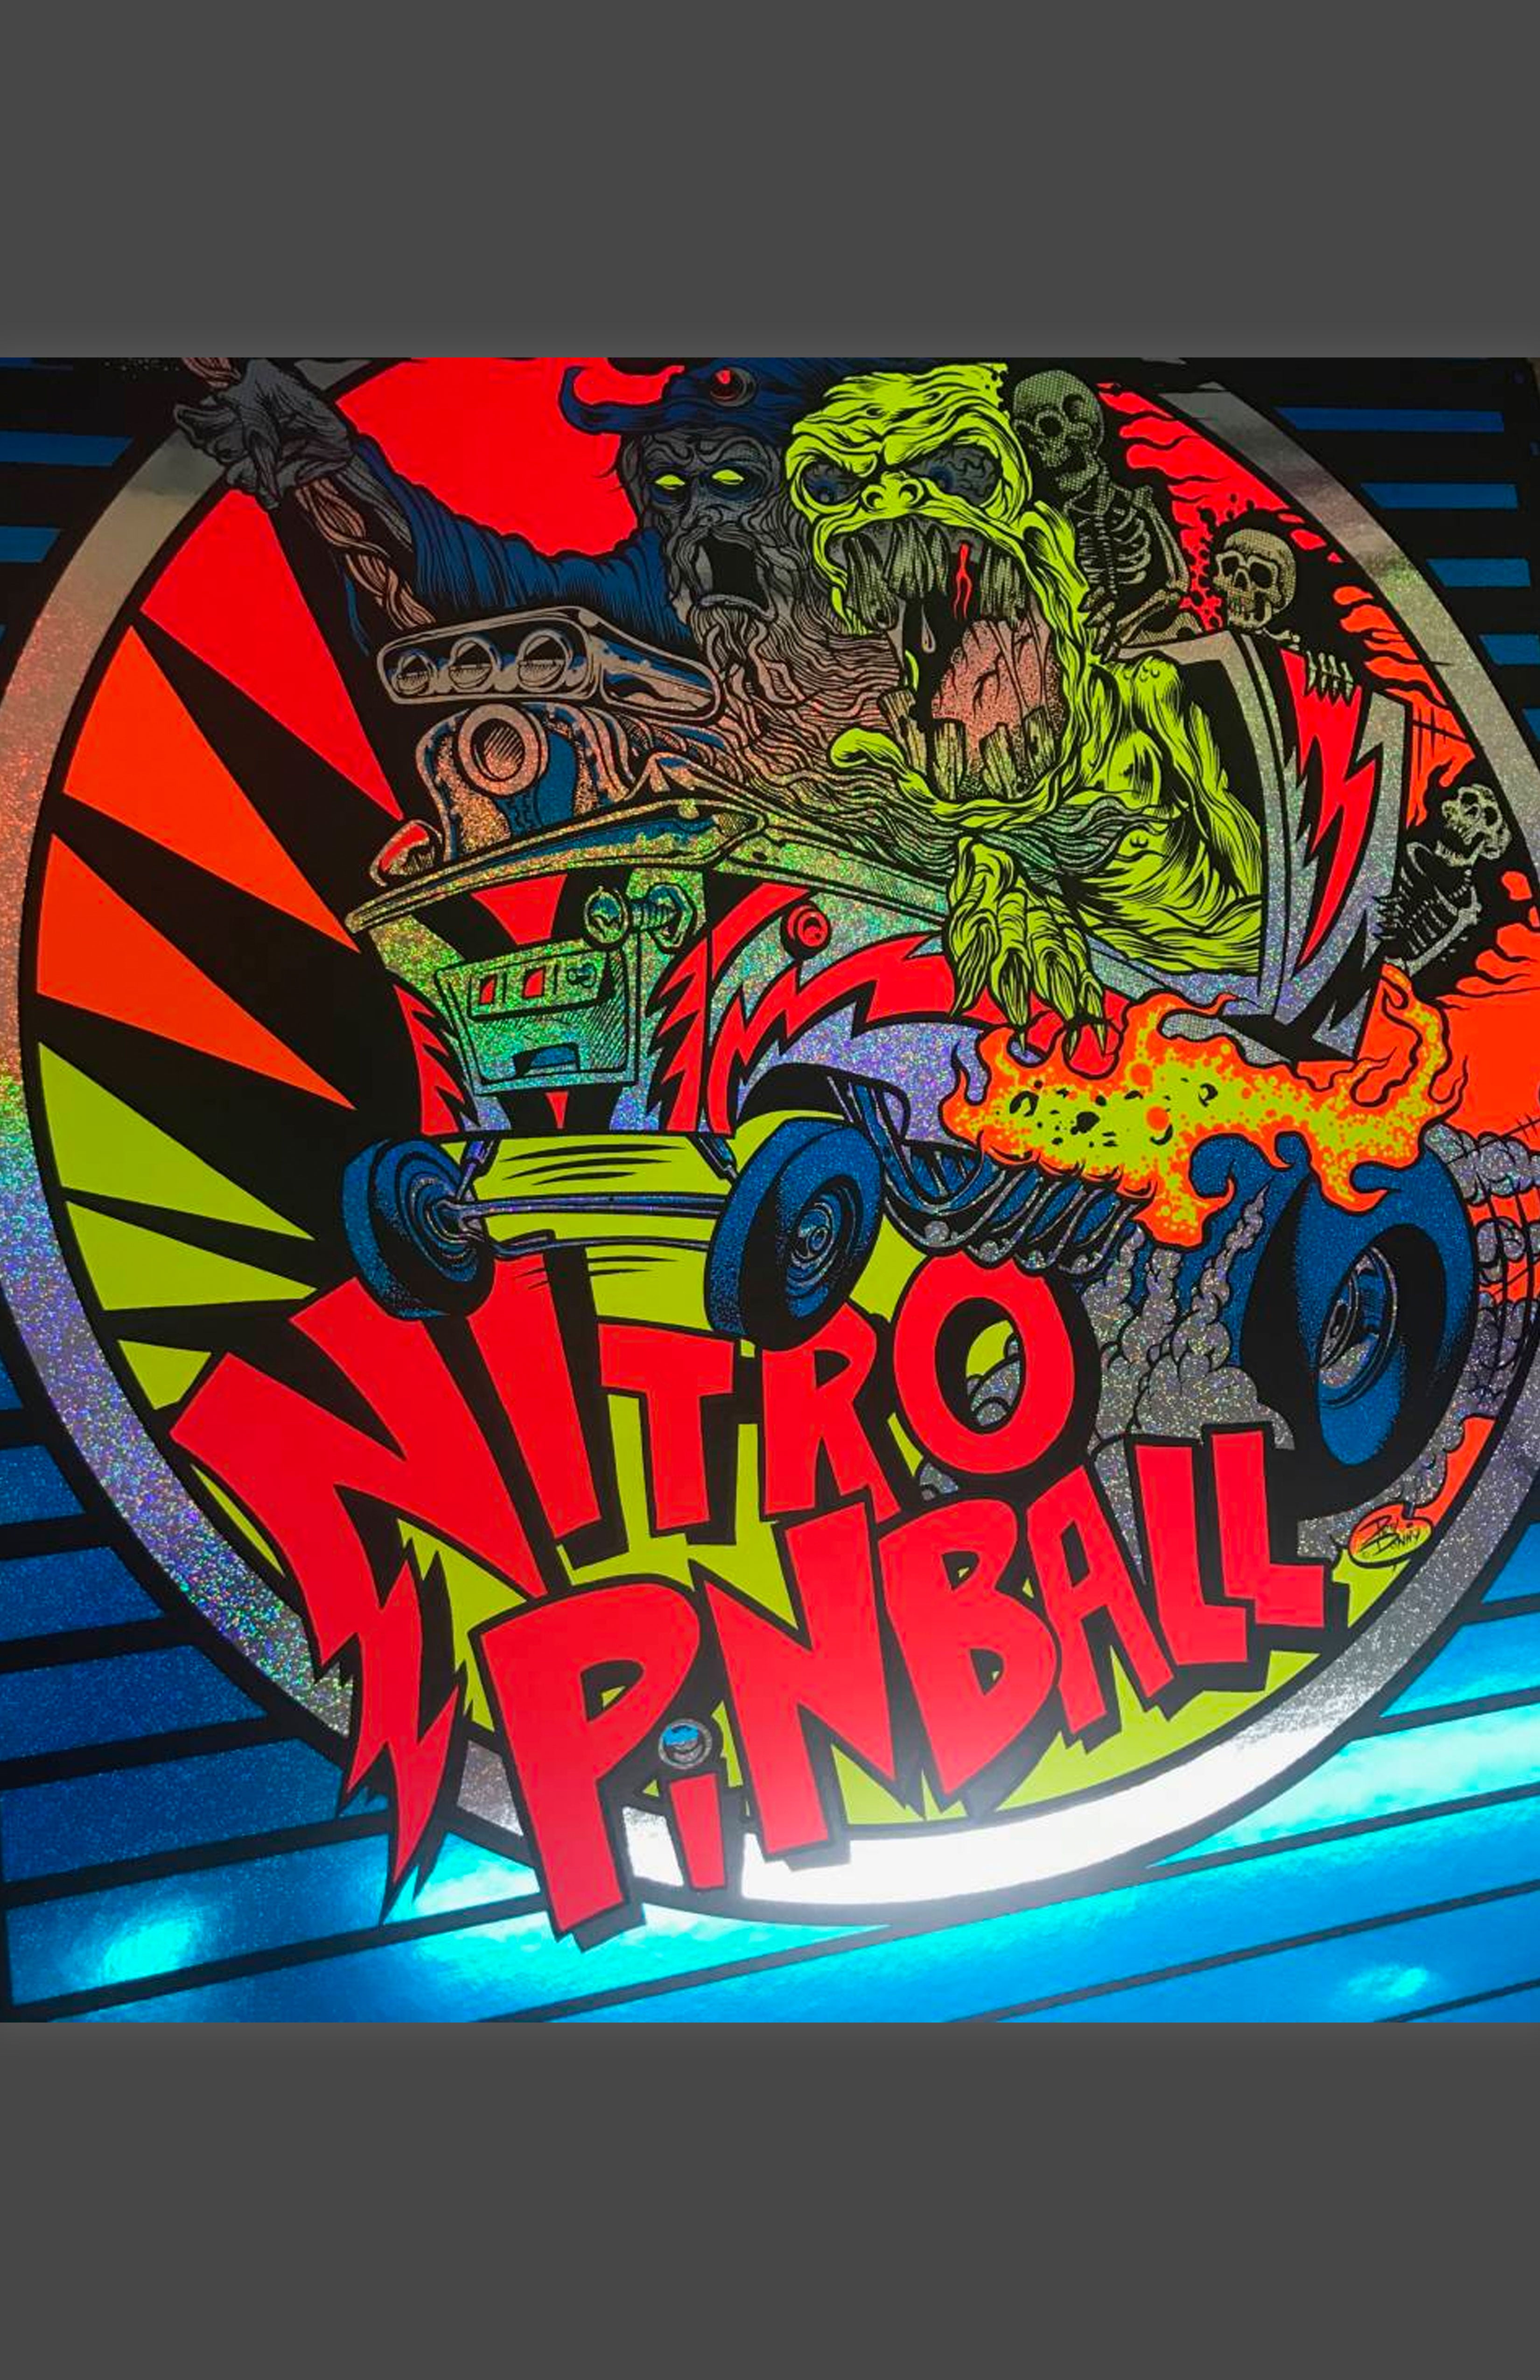 Nitro Pinball L.E. Poster SPARKLE Designed: by Dirty Donny